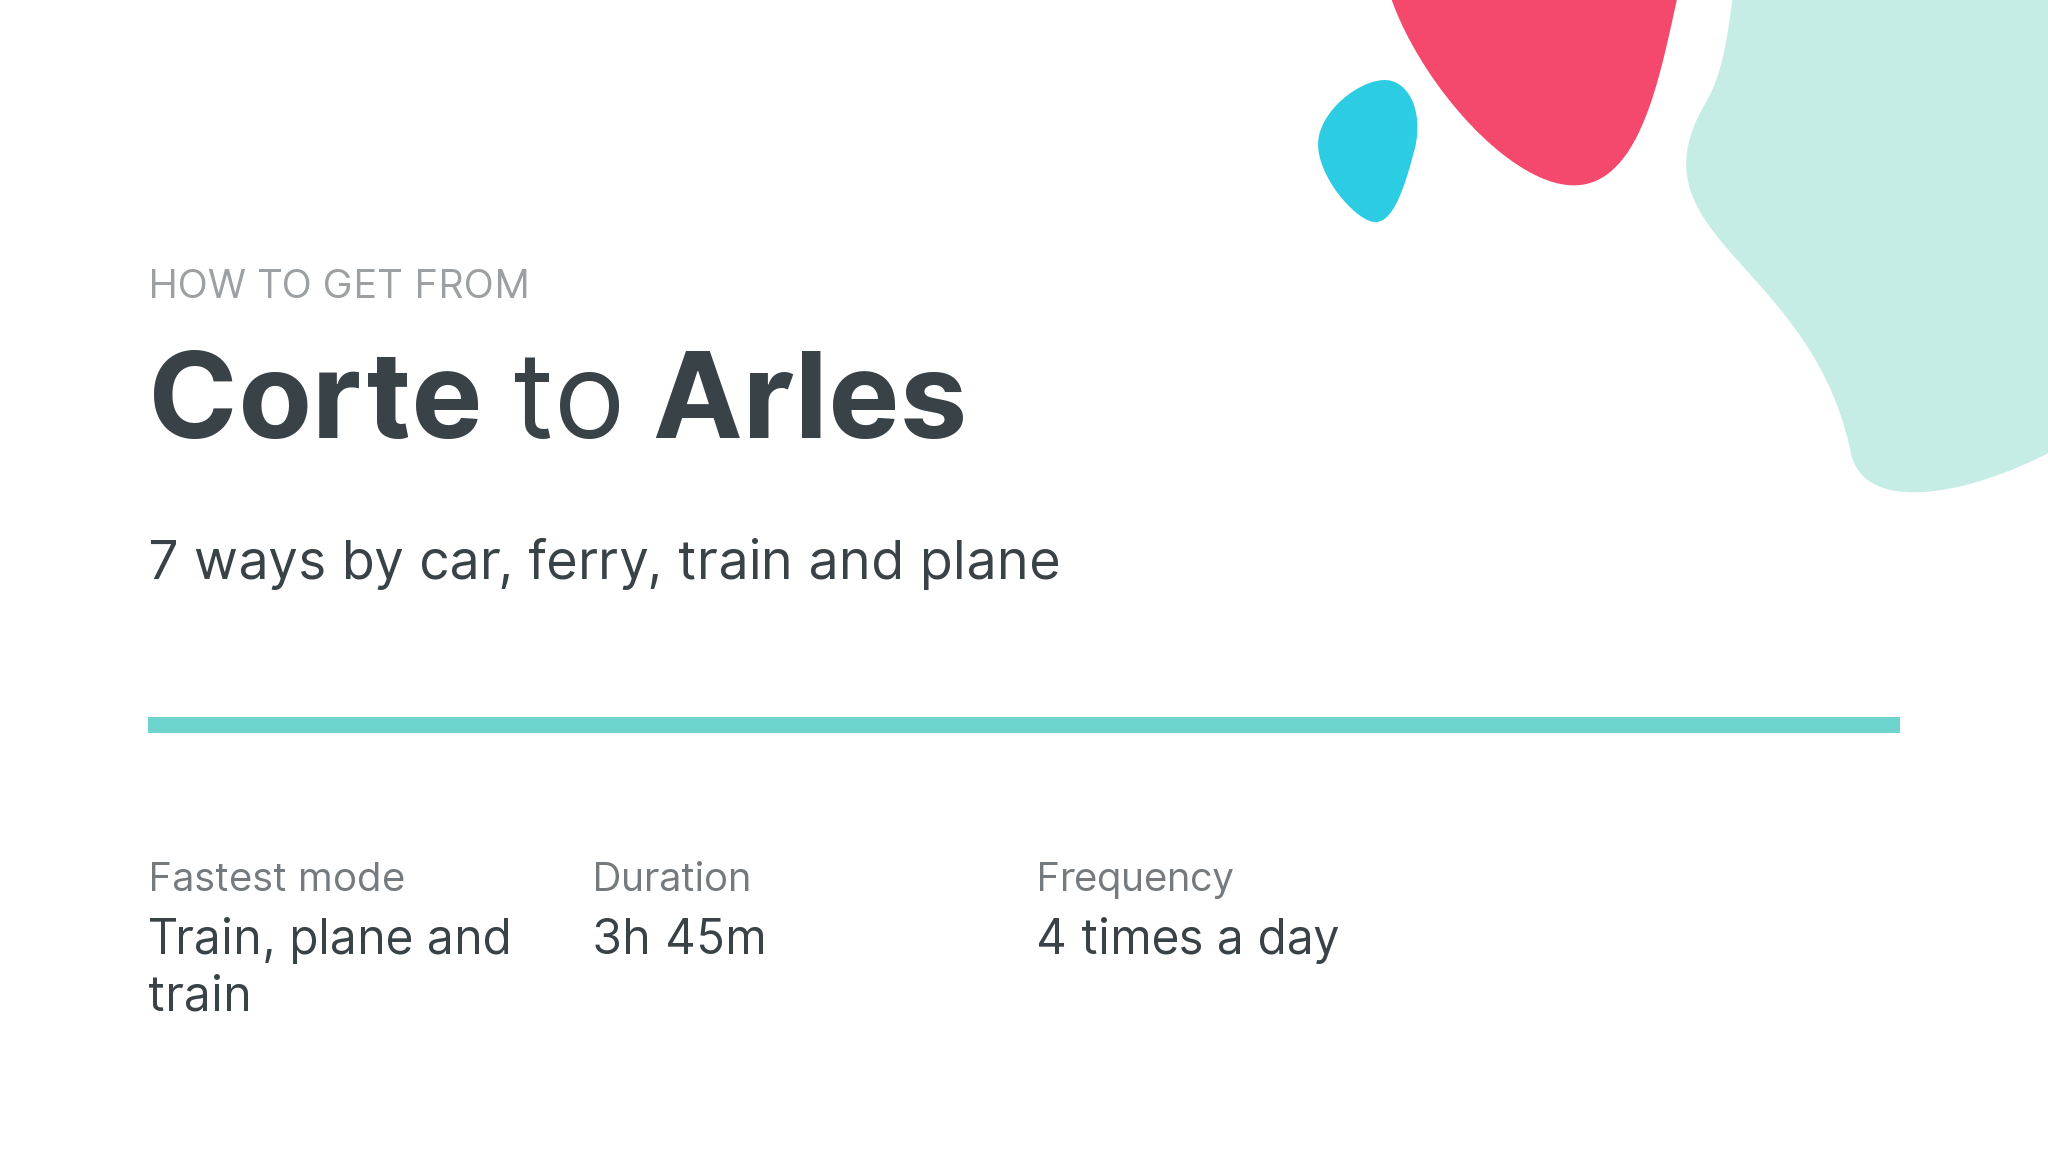 How do I get from Corte to Arles